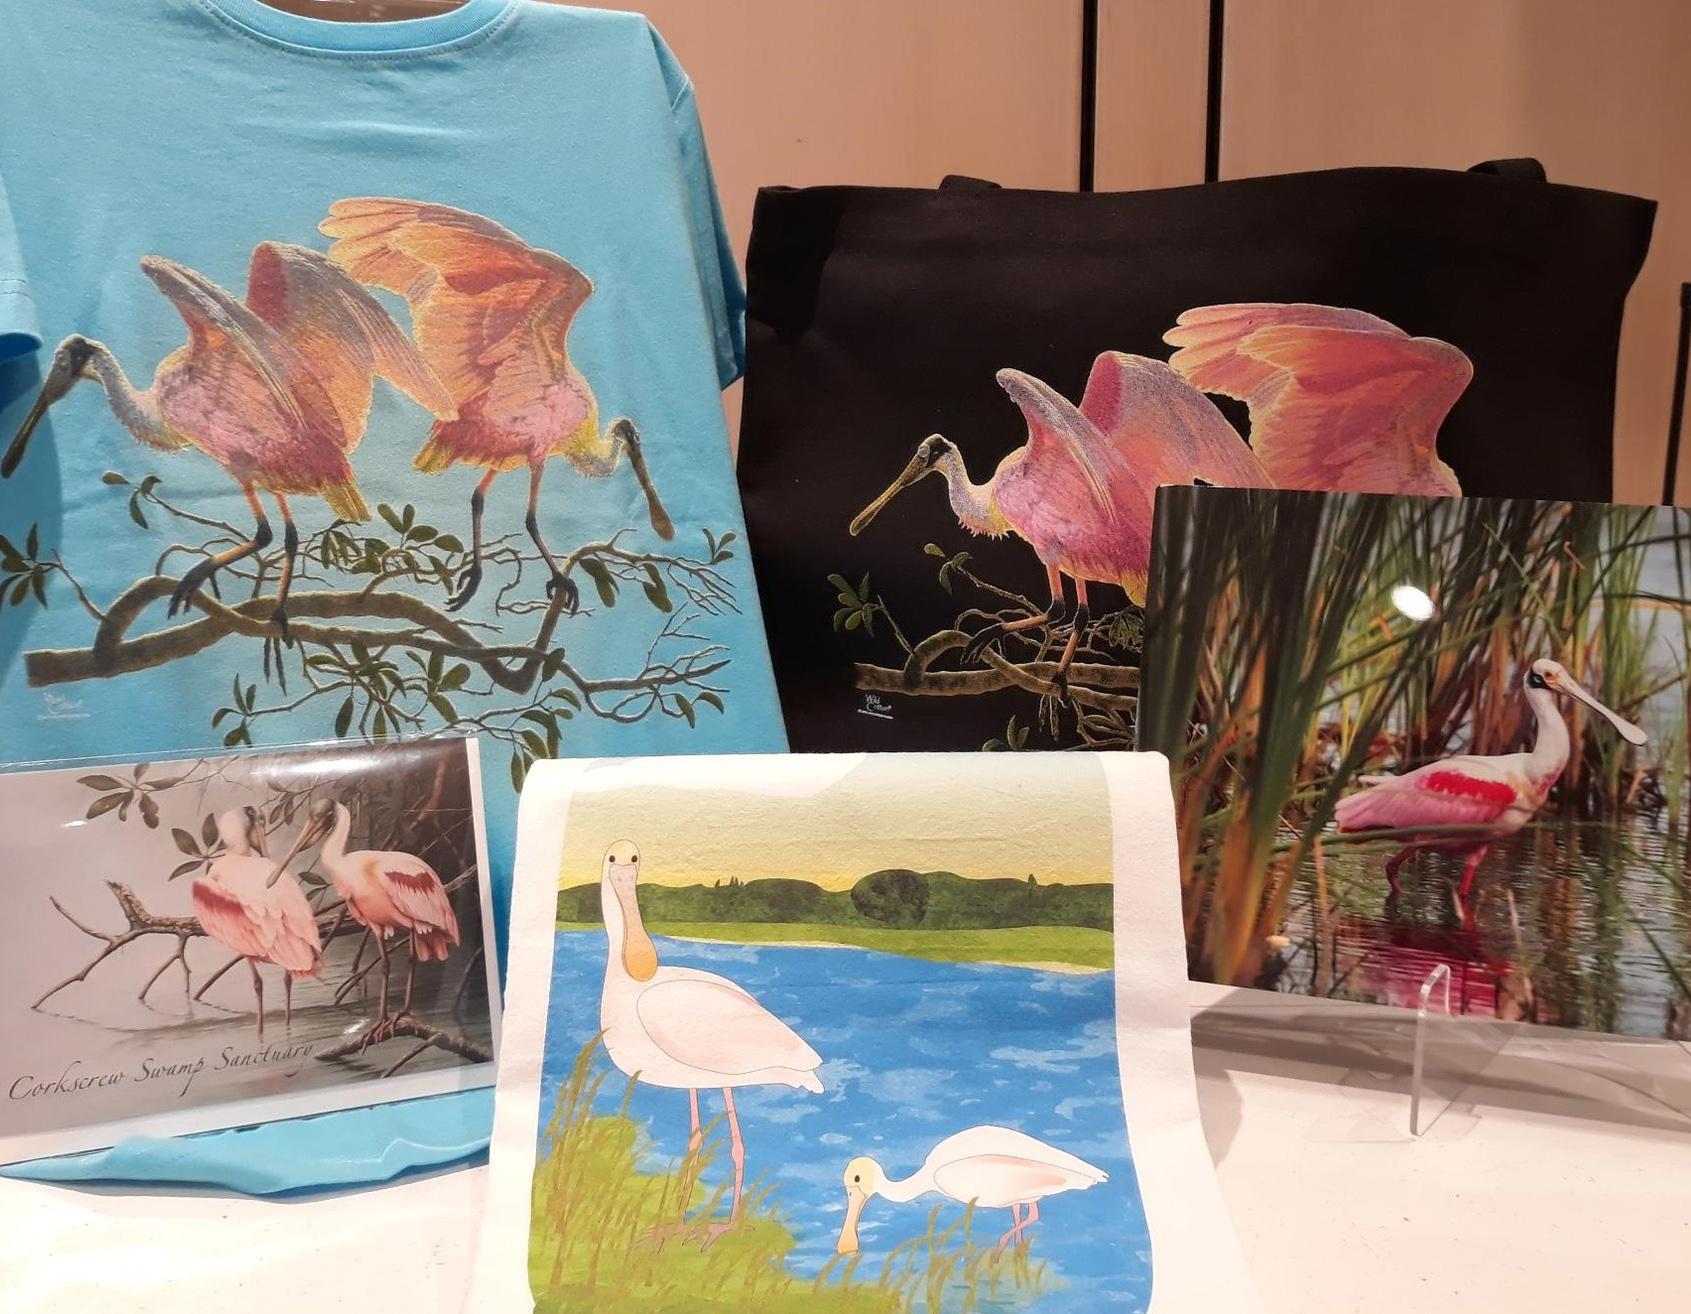 merchandise with roseate spoonbill imagery